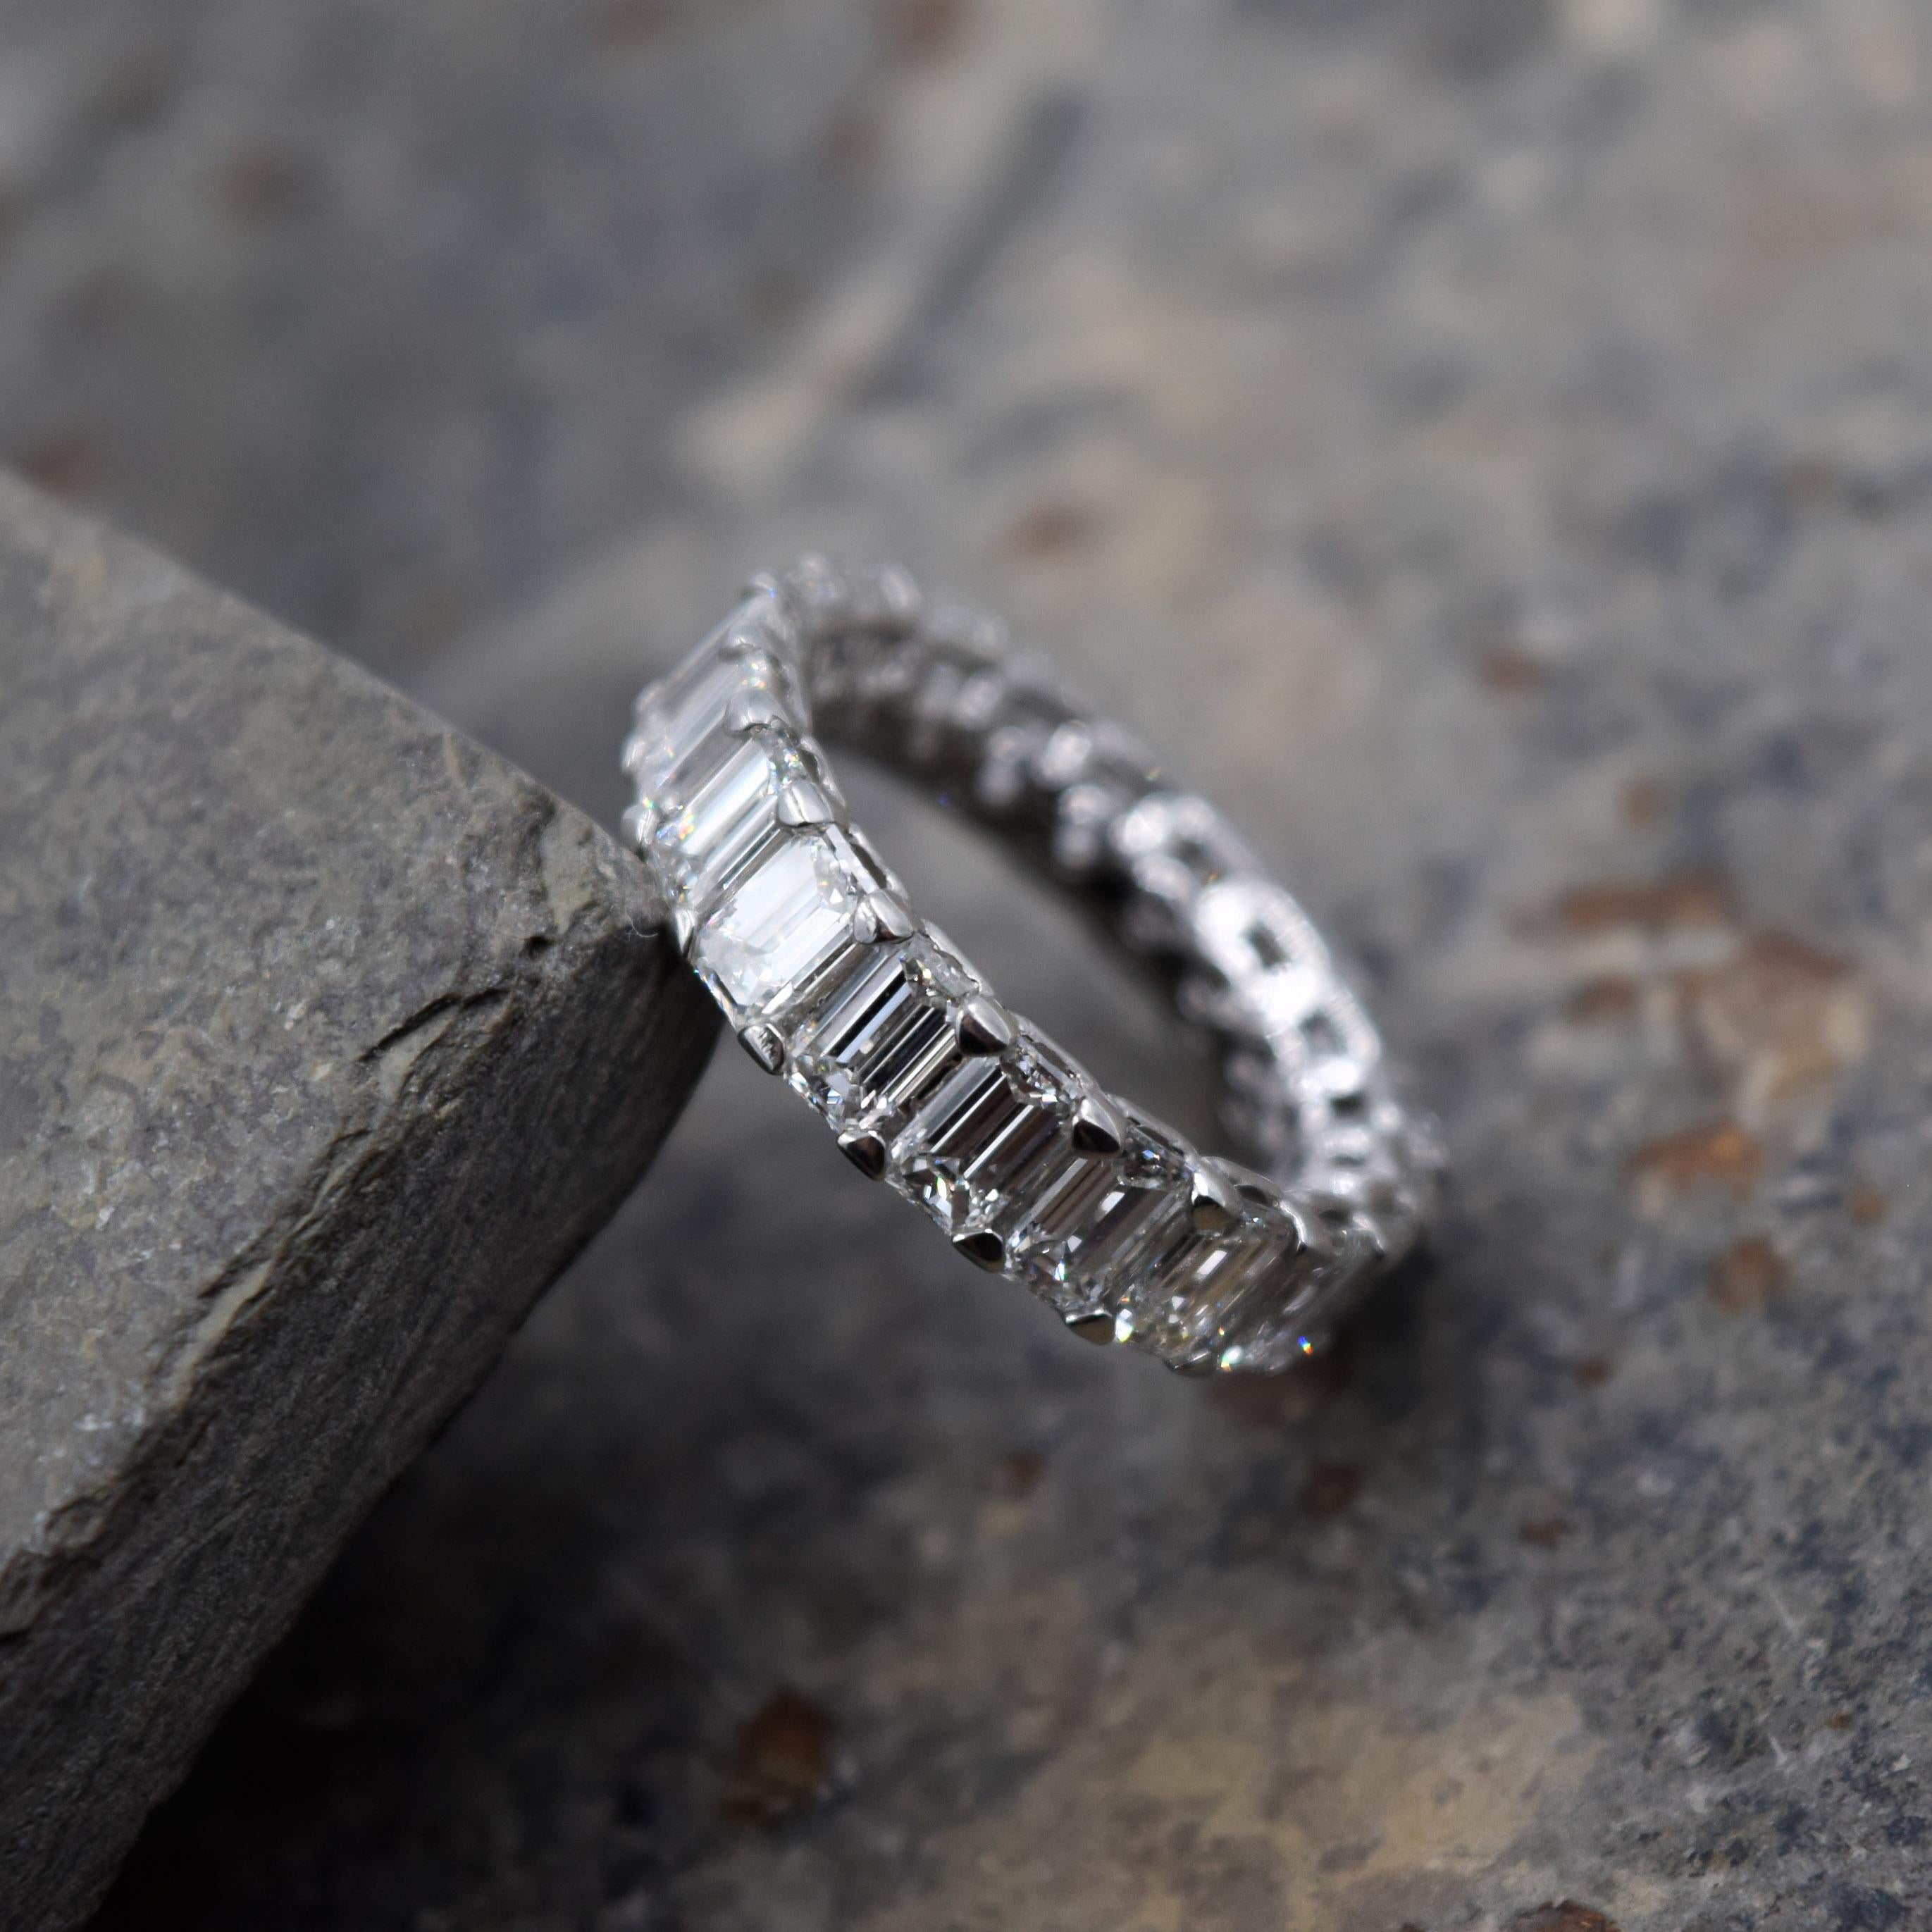 Beautiful Diamond Band by Elliott Chandler.
20 emerald cut diamonds totaling 5.06 carats are prong set in a platinum setting.
The size of this ring is 5 and can not be sized.